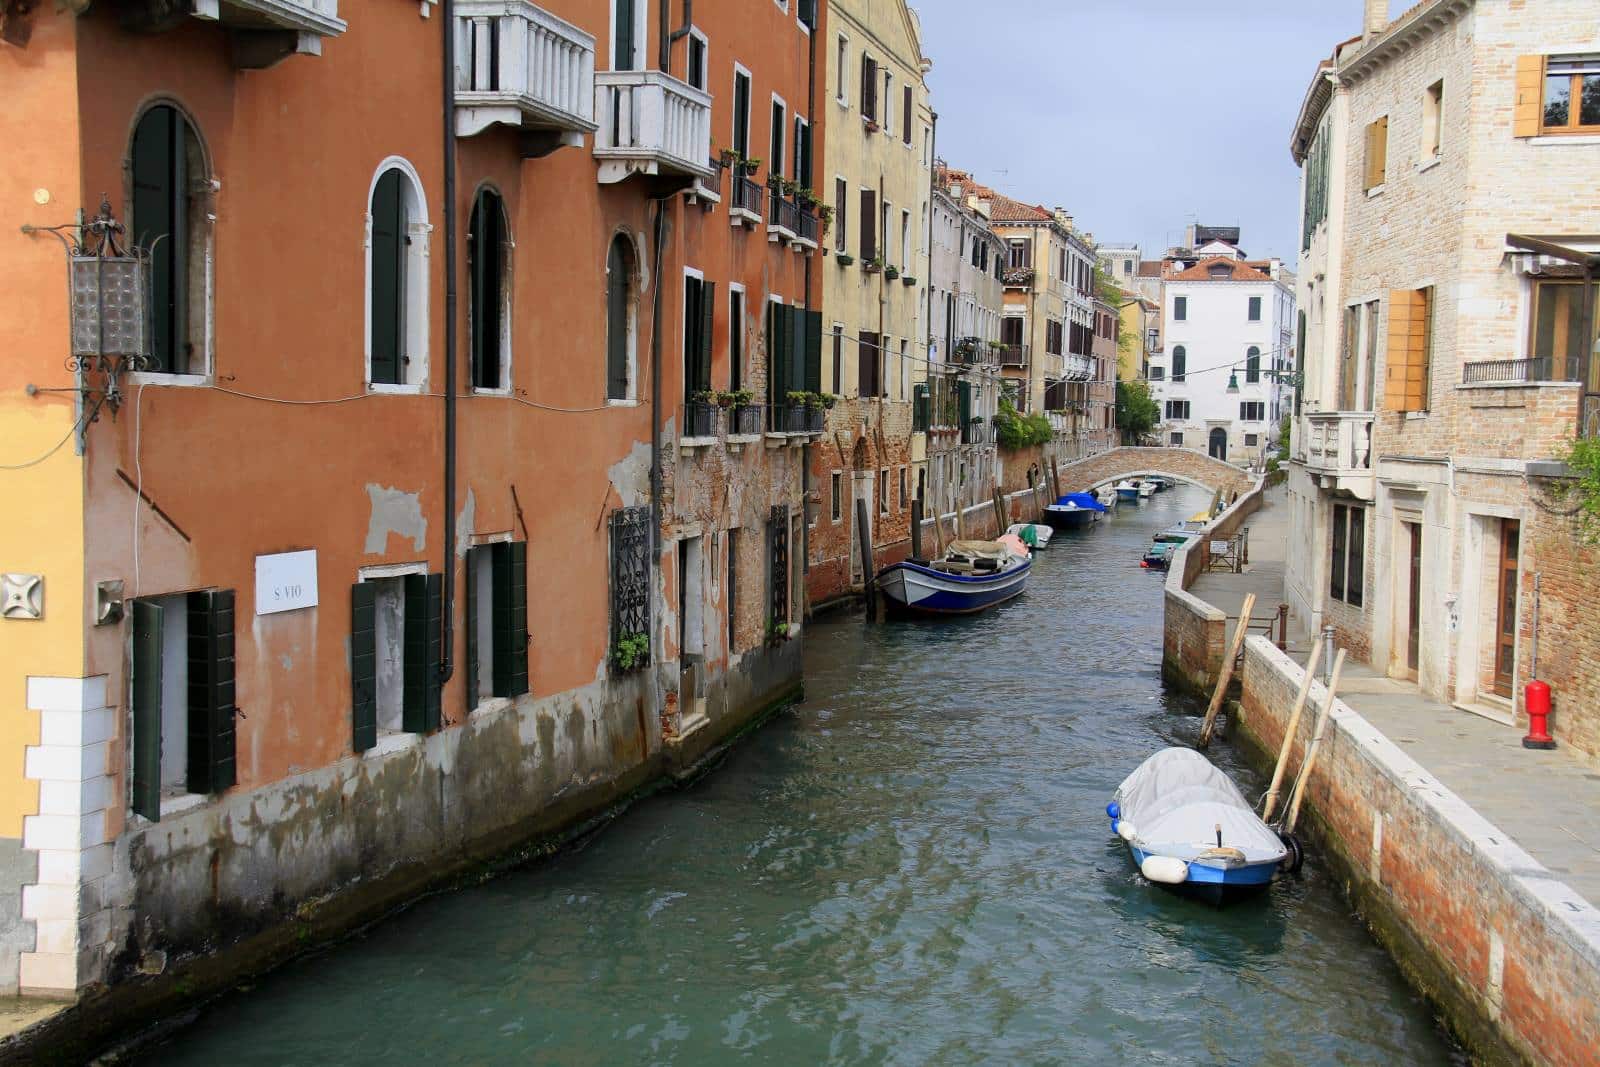 Image Credit: Shutterstock / Guna Leite <p><span>The new contribution system is being enacted in the hopes of offsetting the worst effects of tourism on the city. The twin problems of over-tourism and rising sea levels mean that the antique city is now literally sinking into the surrounding waters that have made it so famous.</span></p>